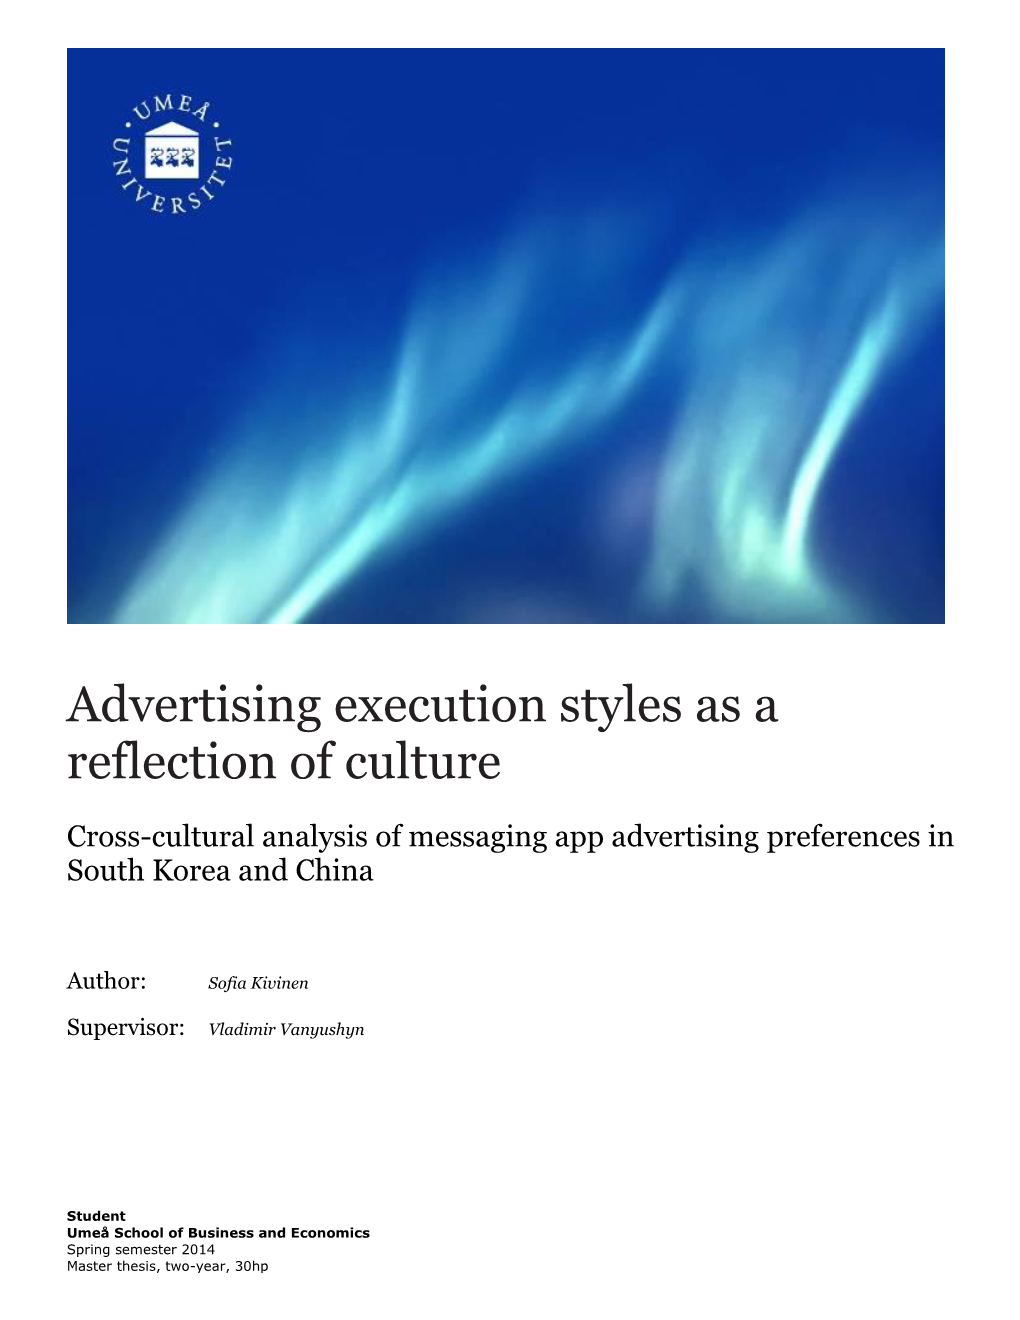 Advertising Execution Styles As a Reflection of Culture